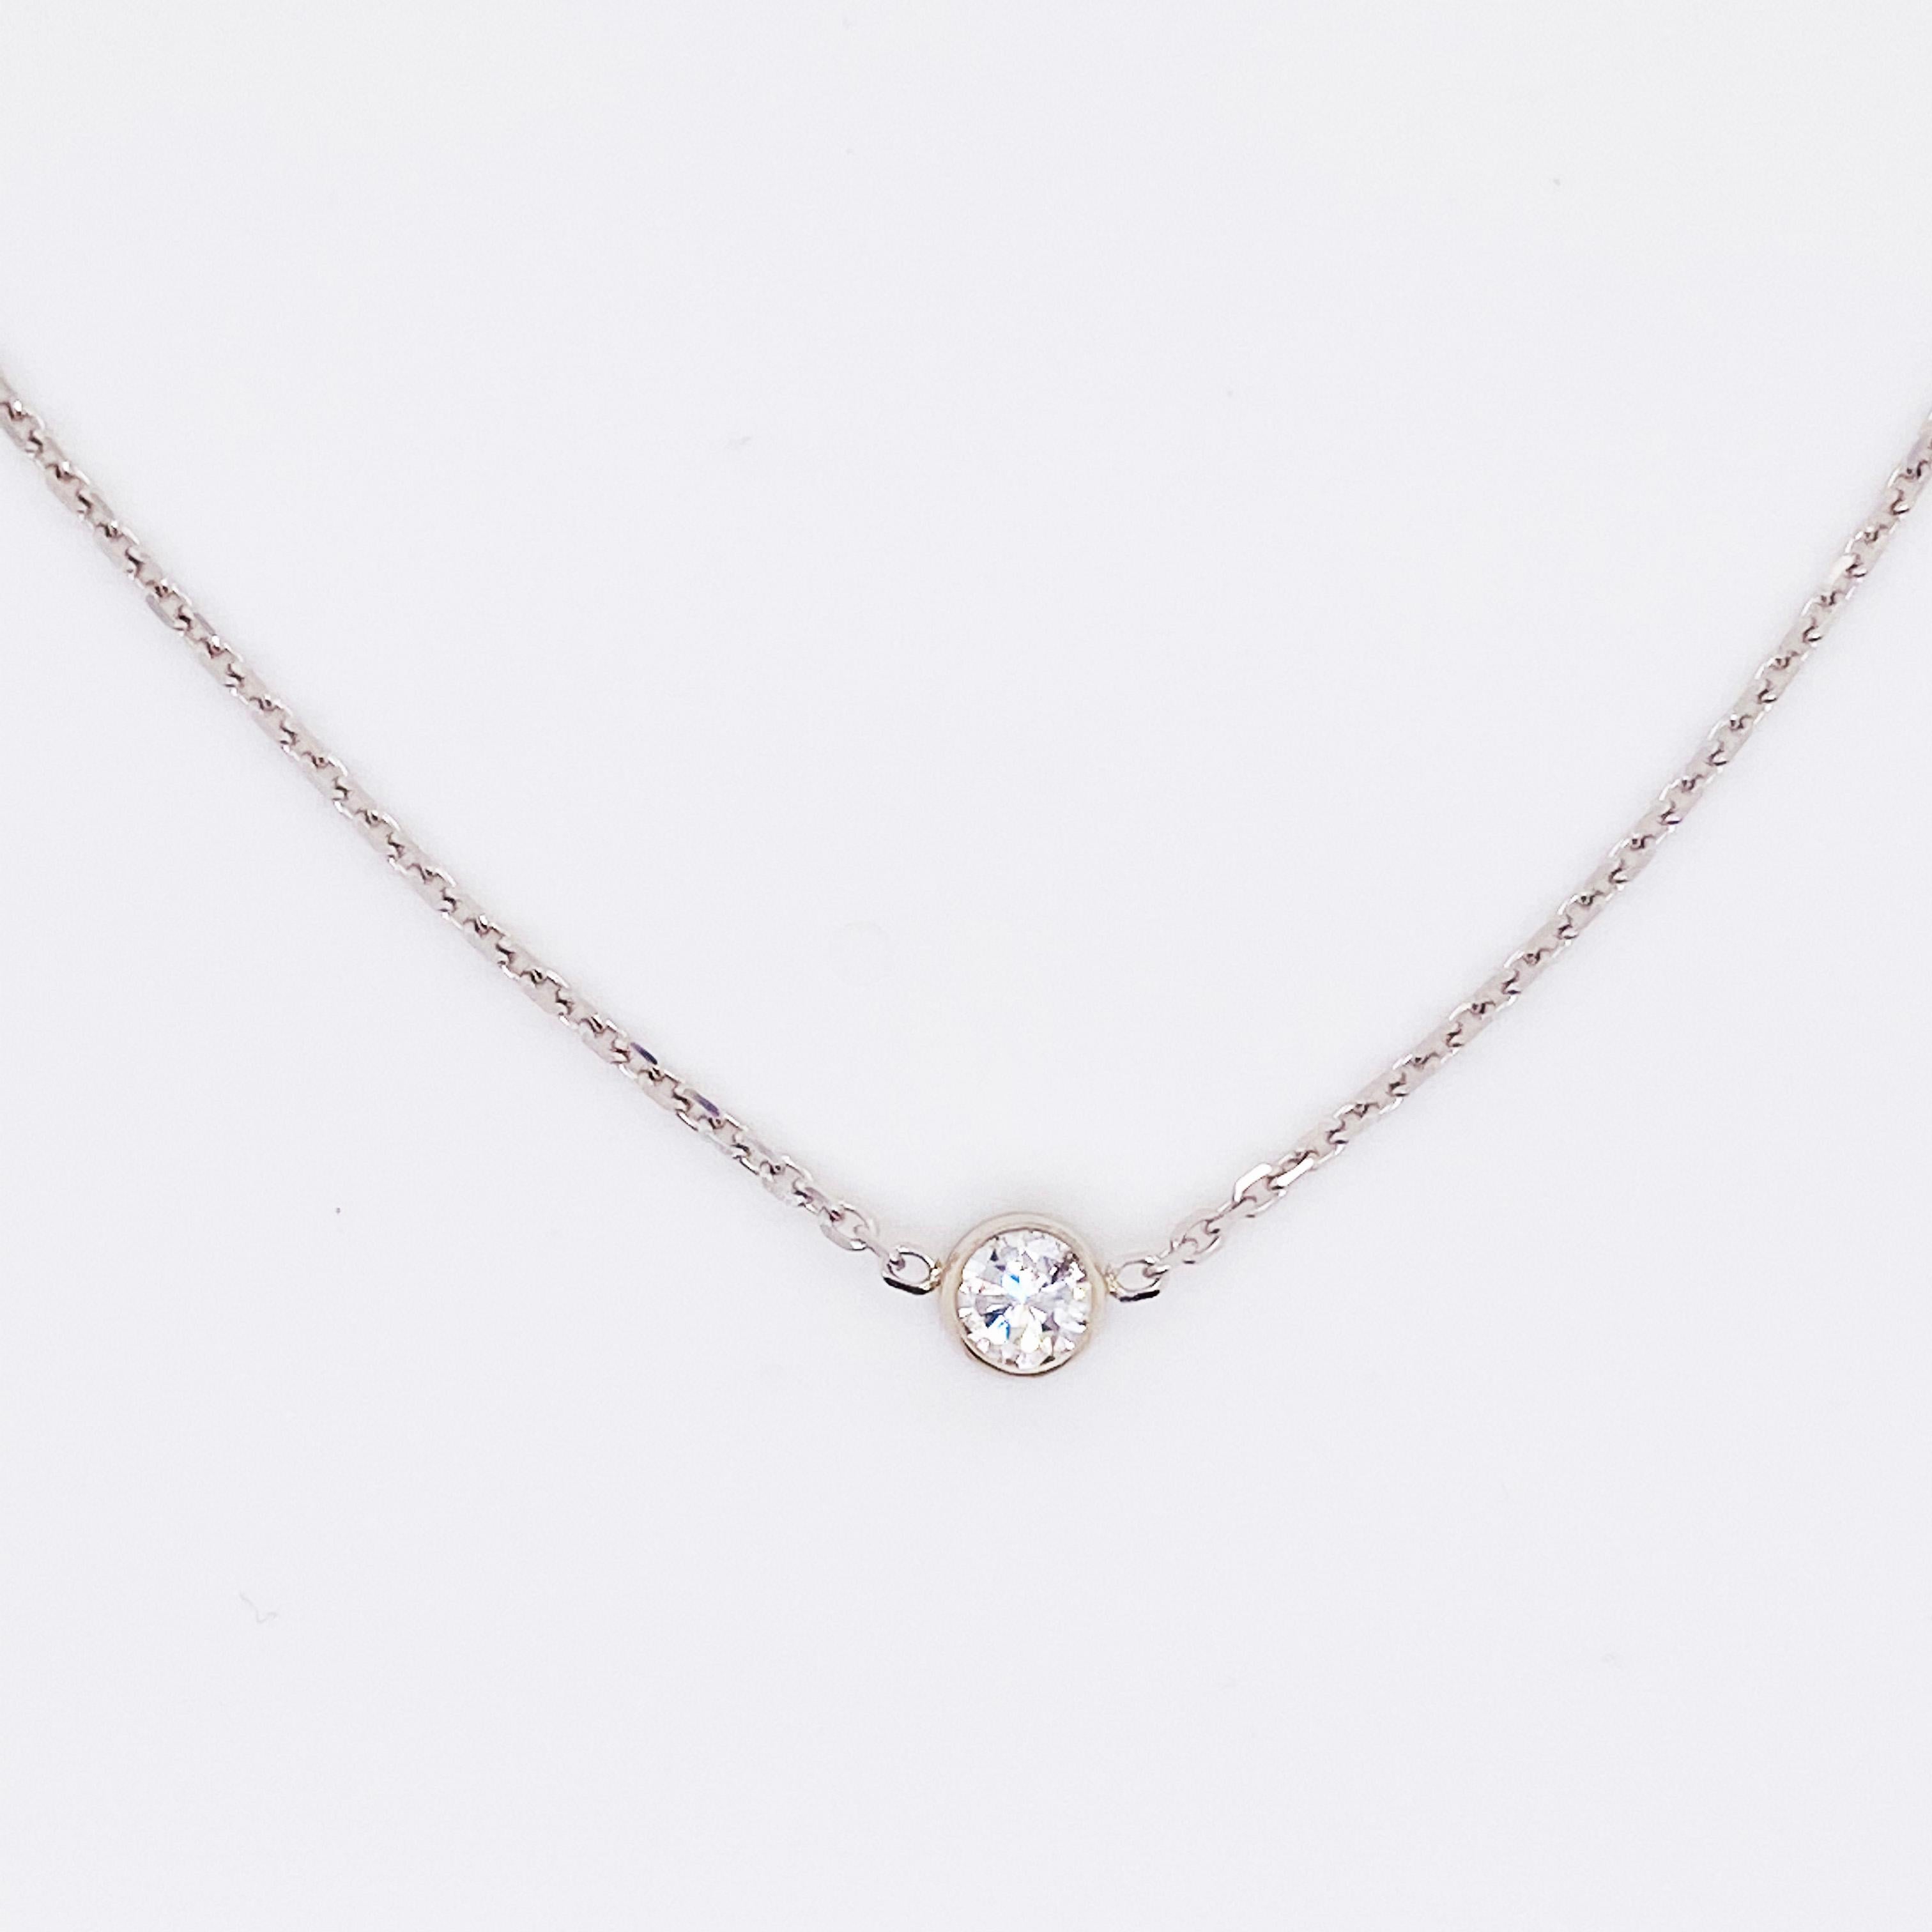 This 14 karat white gold diamond bezel necklace is a classic! This simple design is one to be worn everyday and with any outfit.  You can wear it with your finest dress and also in your workout clothes.  The diamond is lovely and shines from any